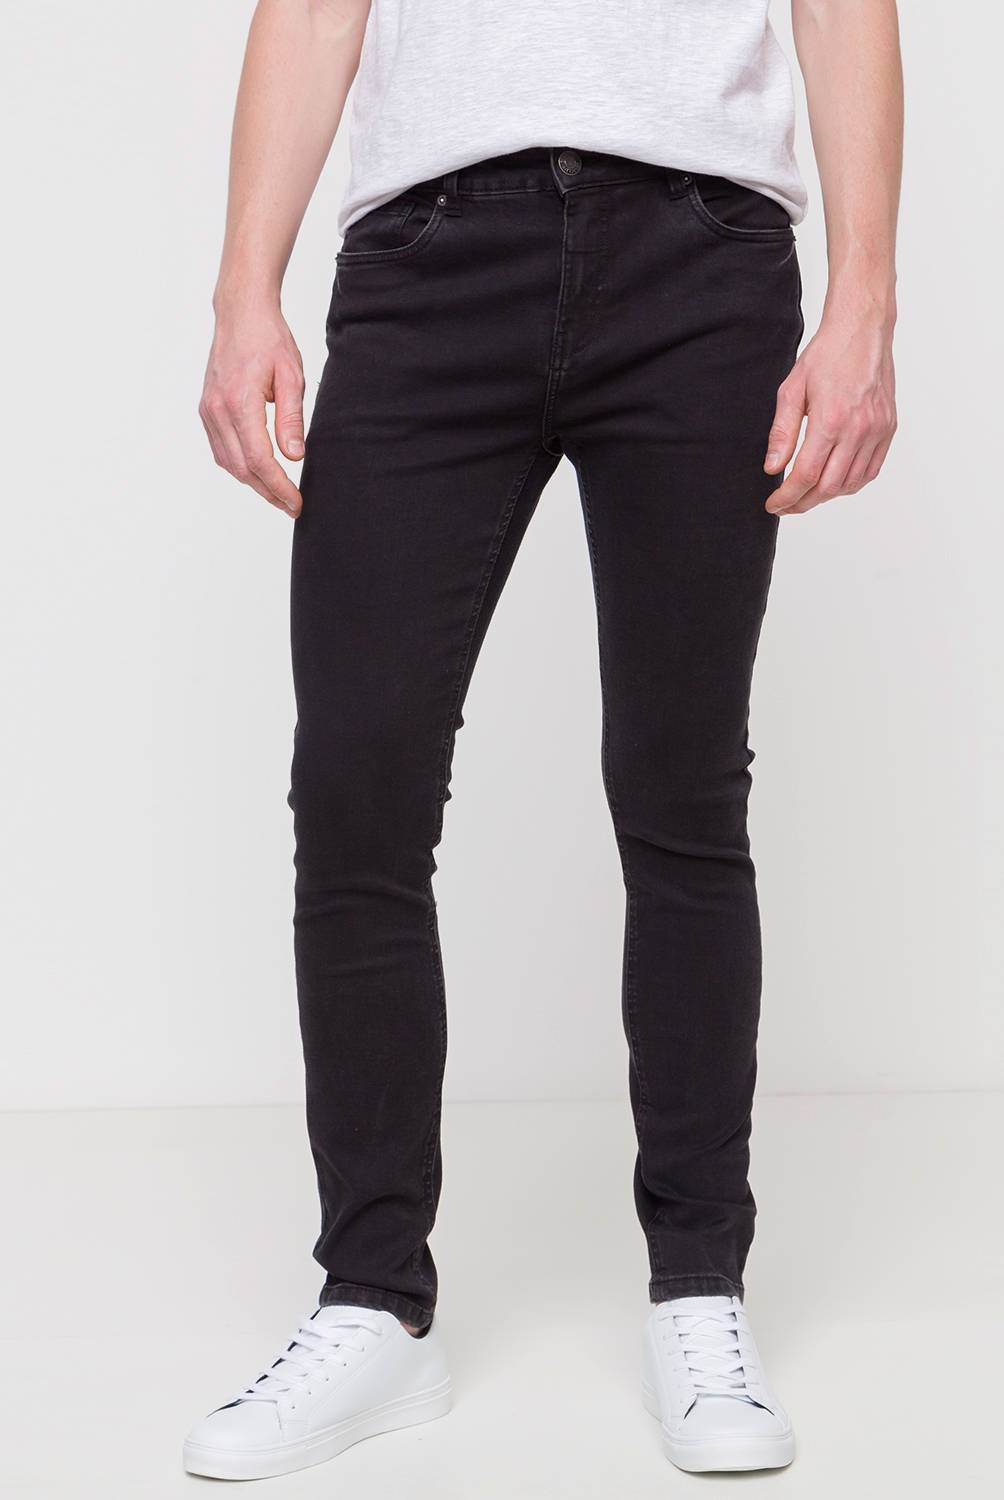 BEARCLIFF - Bearcliff Jeans Super Skinny Fit Hombre